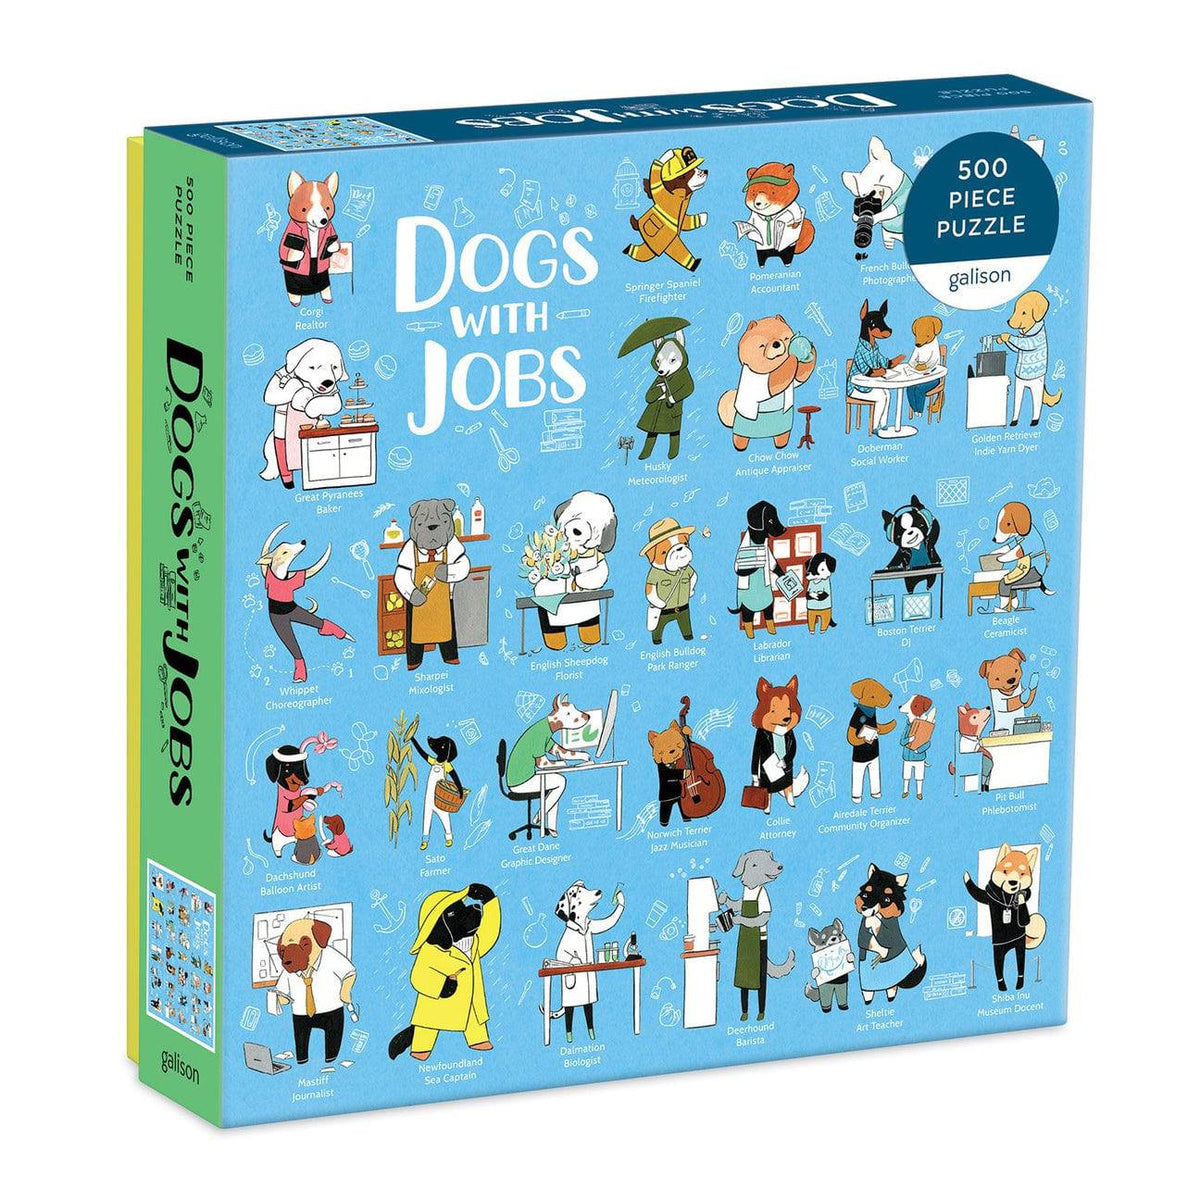 Dogs with Jobs 500 pc. Puzzle - The Preppy Bunny